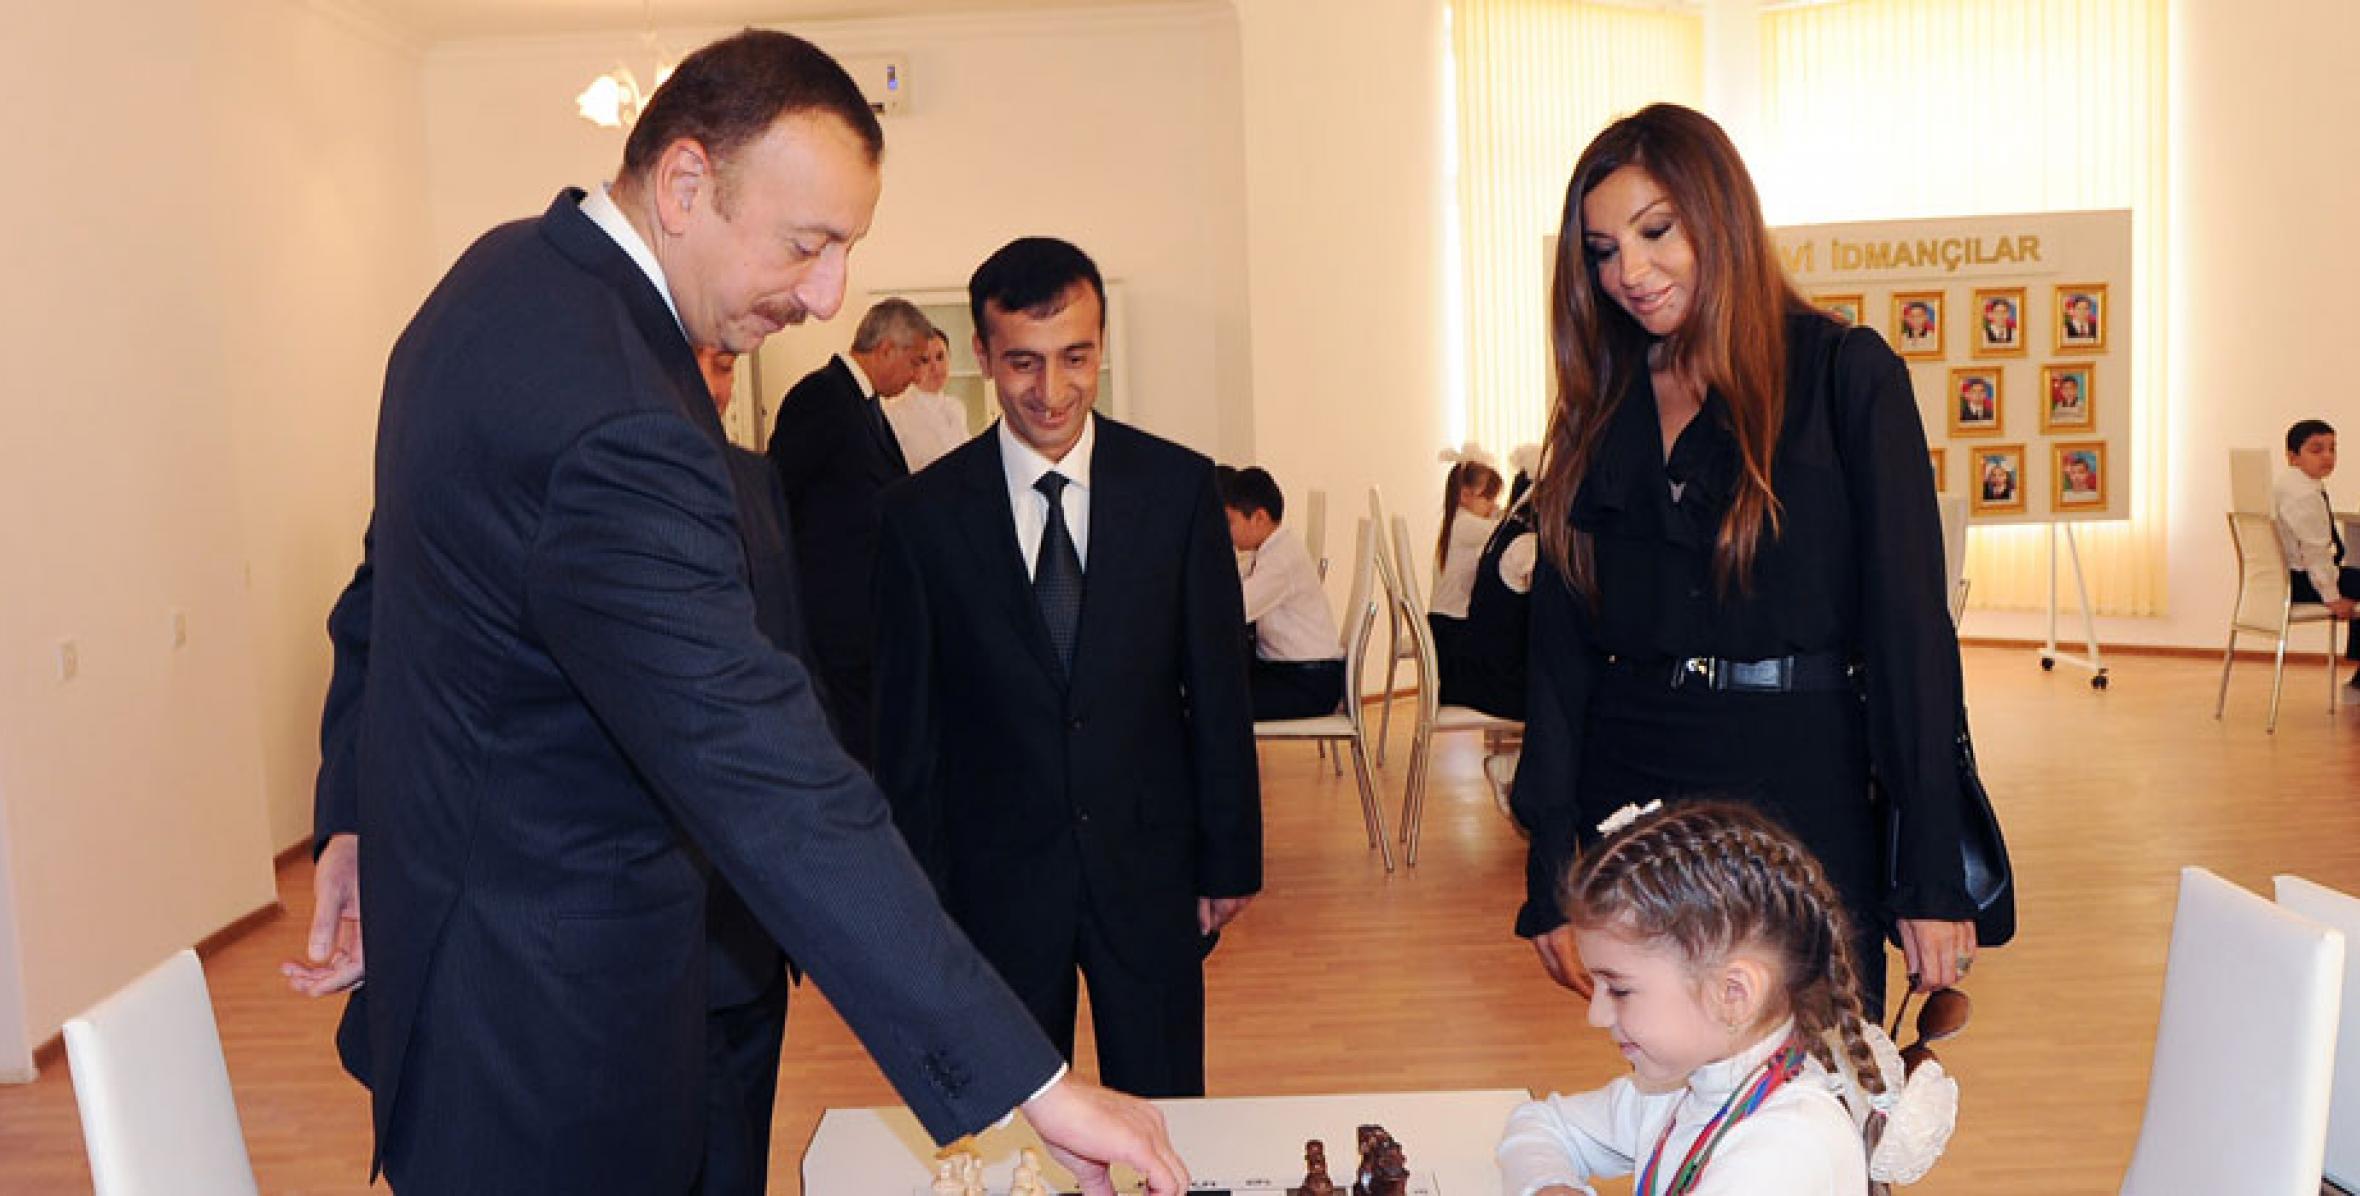 Ilham Aliyev attended the opening ceremony of a chess school in Mingachevir city